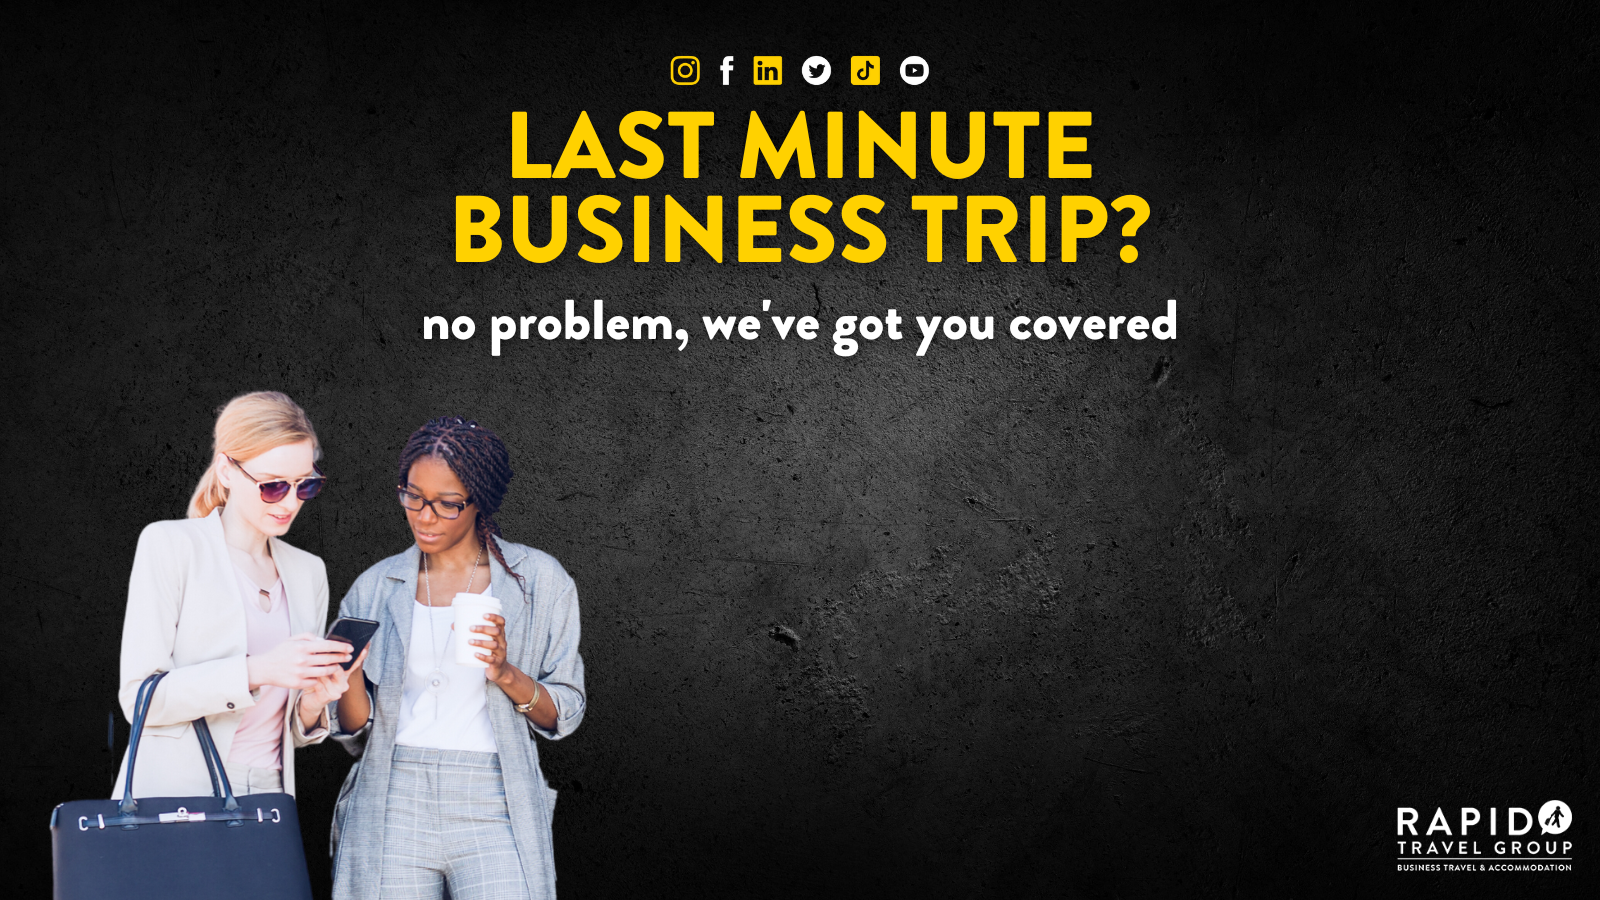 Last minute business trip? No problem, we've got you covered